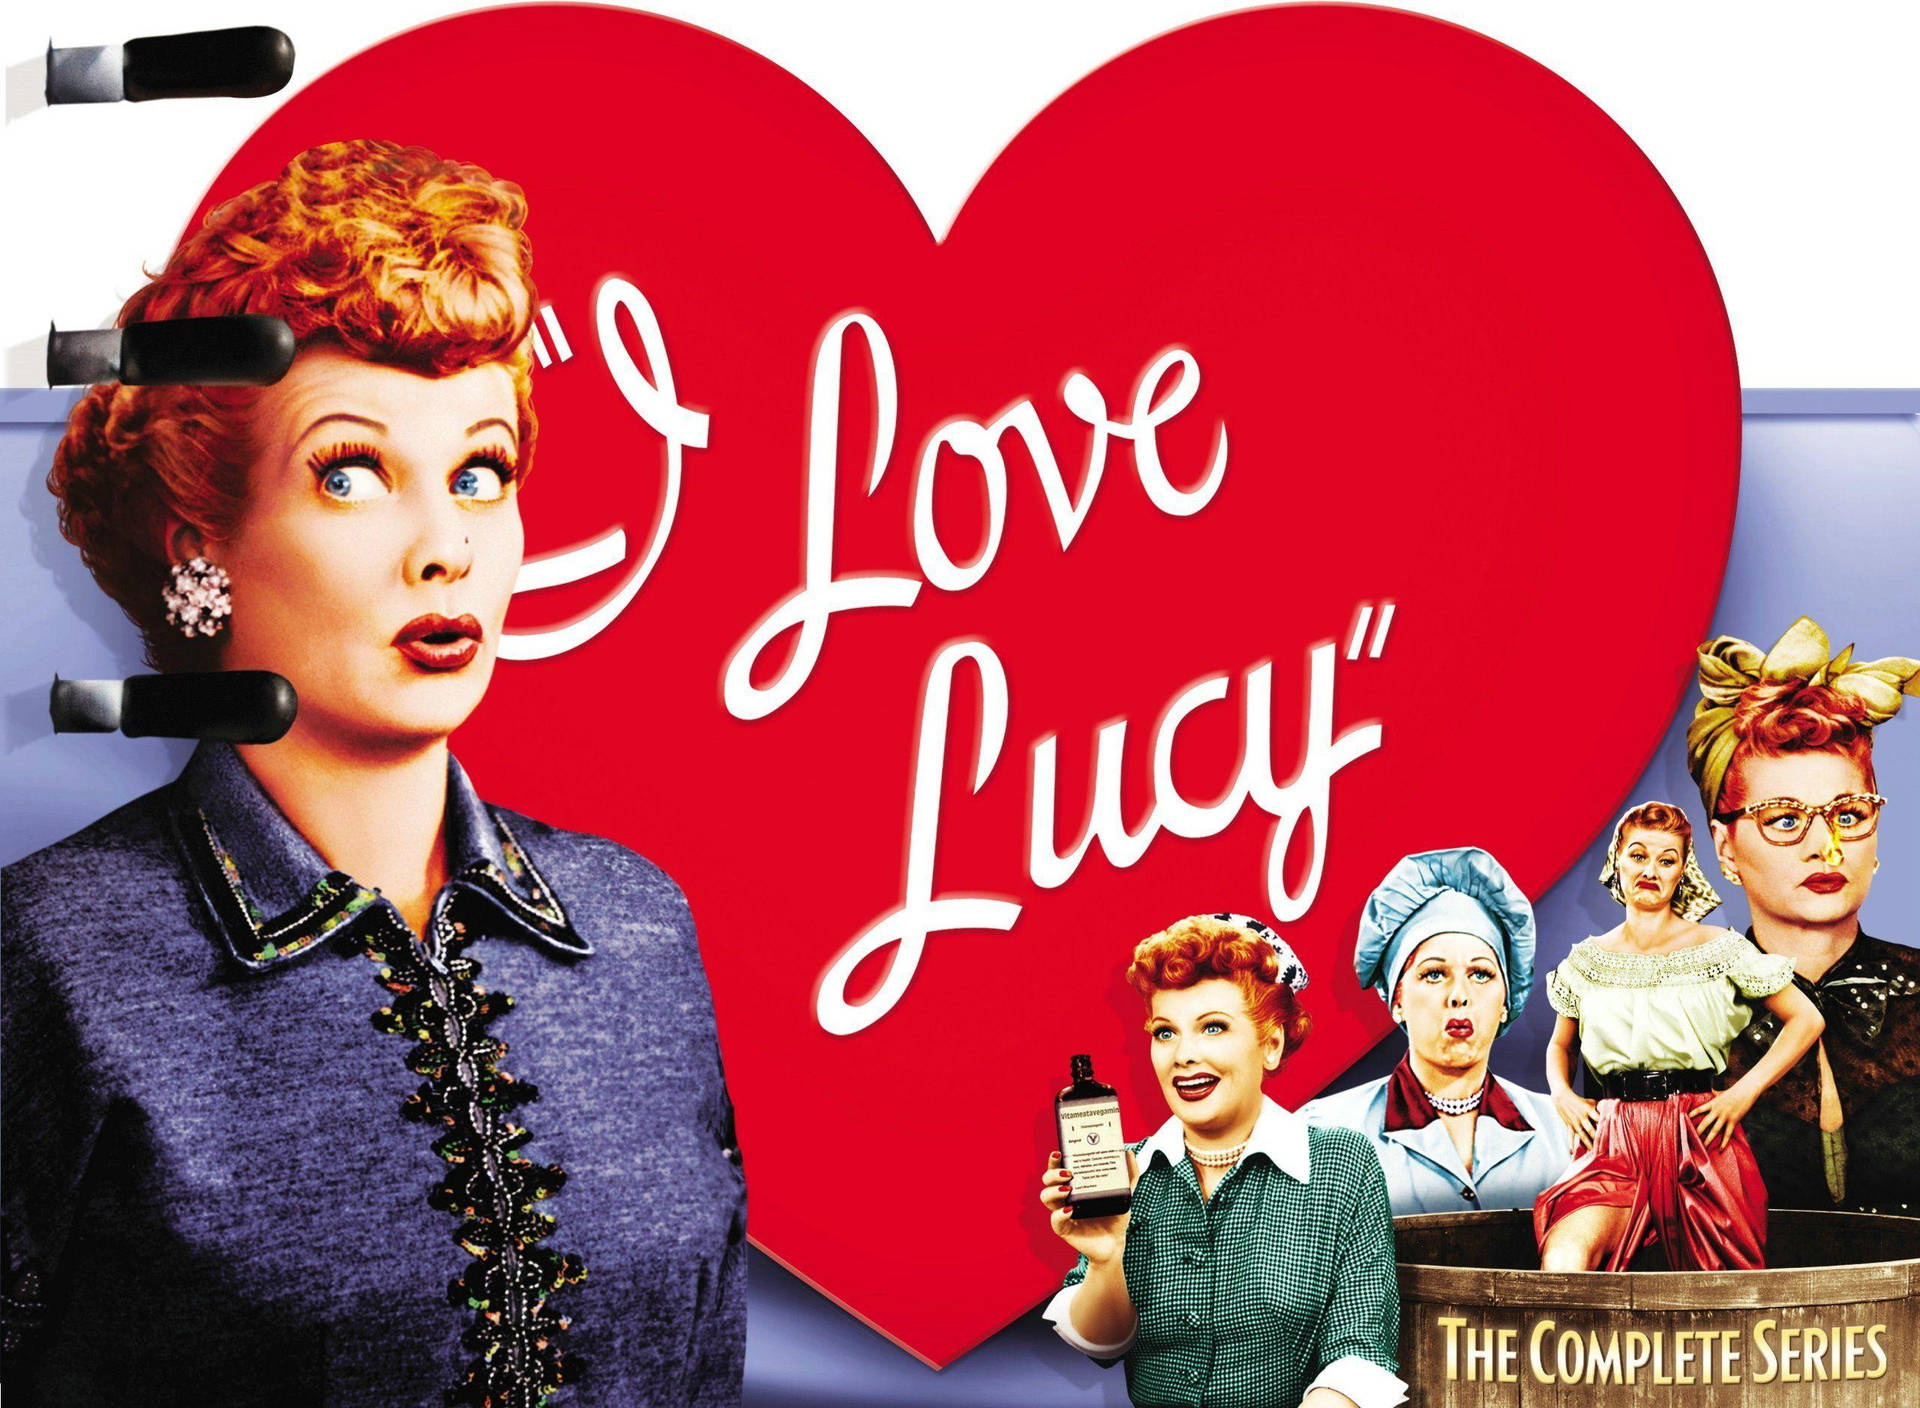 Legendary Actress Lucille Ball From The Iconic Show 'i Love Lucy' Background